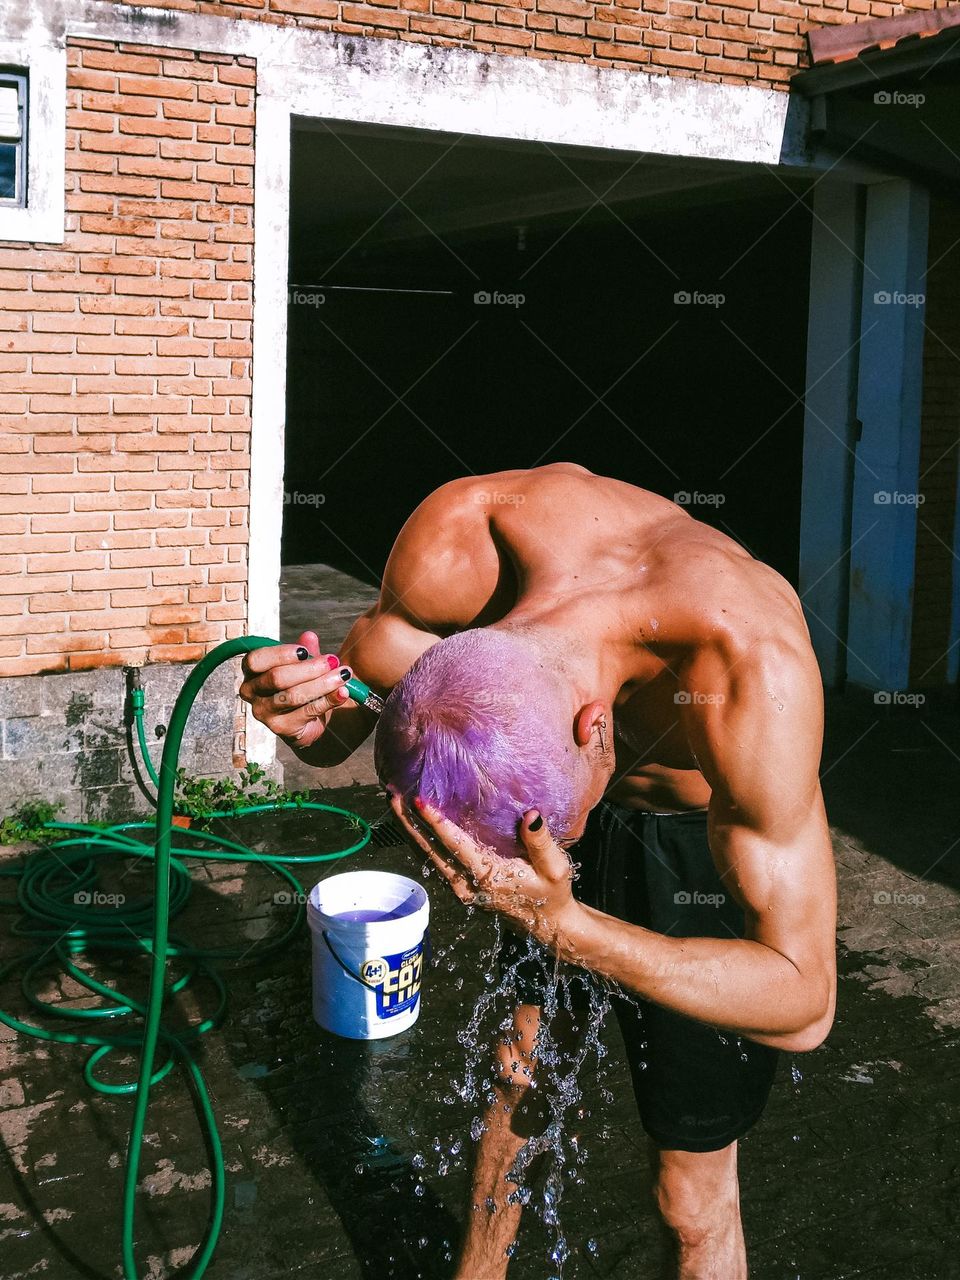 Man with purple hair washing his hair with a water hose. Painted black nails and colorful hair.